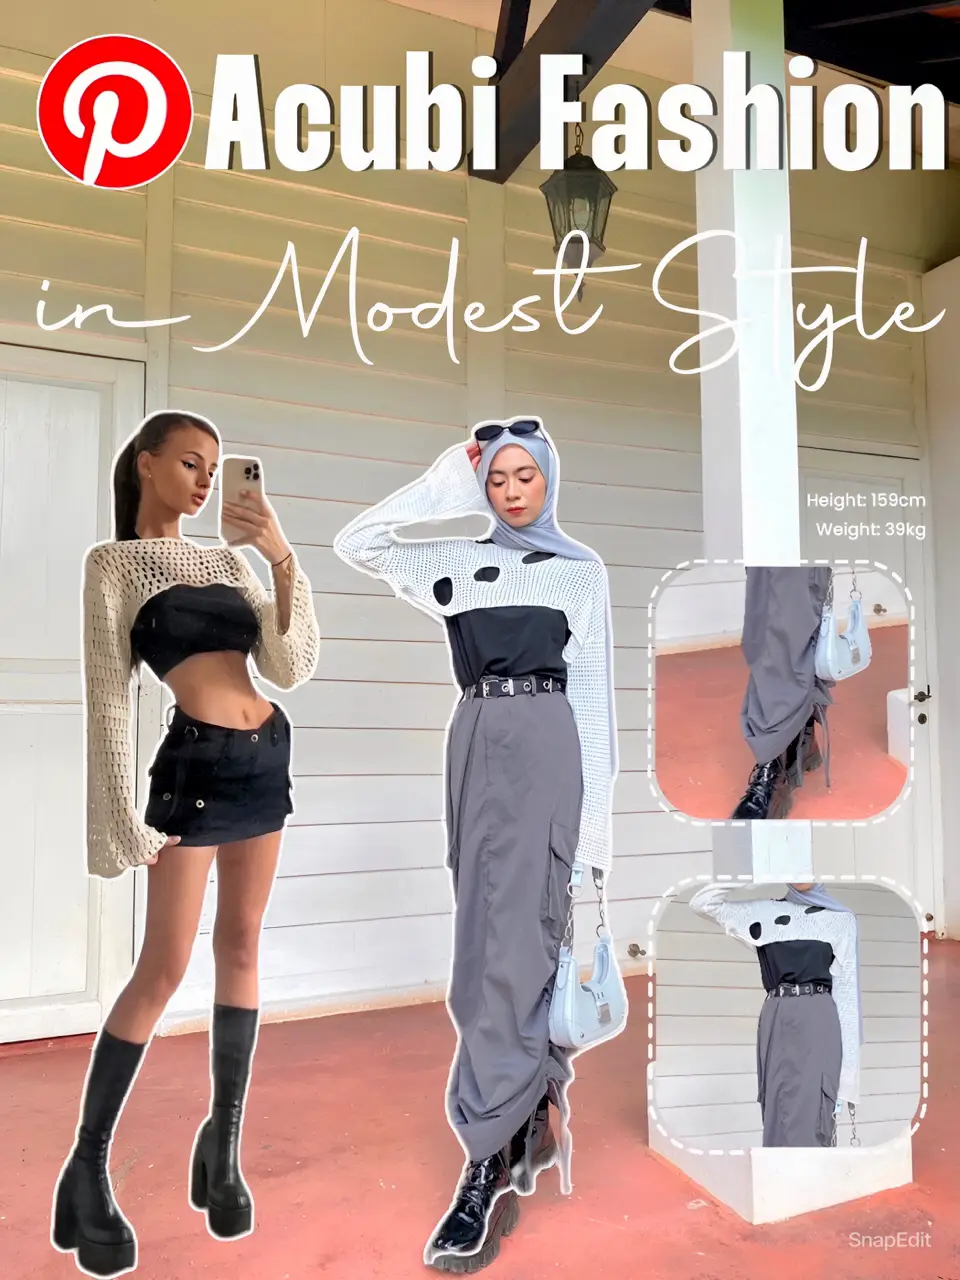 Acubi Fashion Guide for Modest Wear!'s images